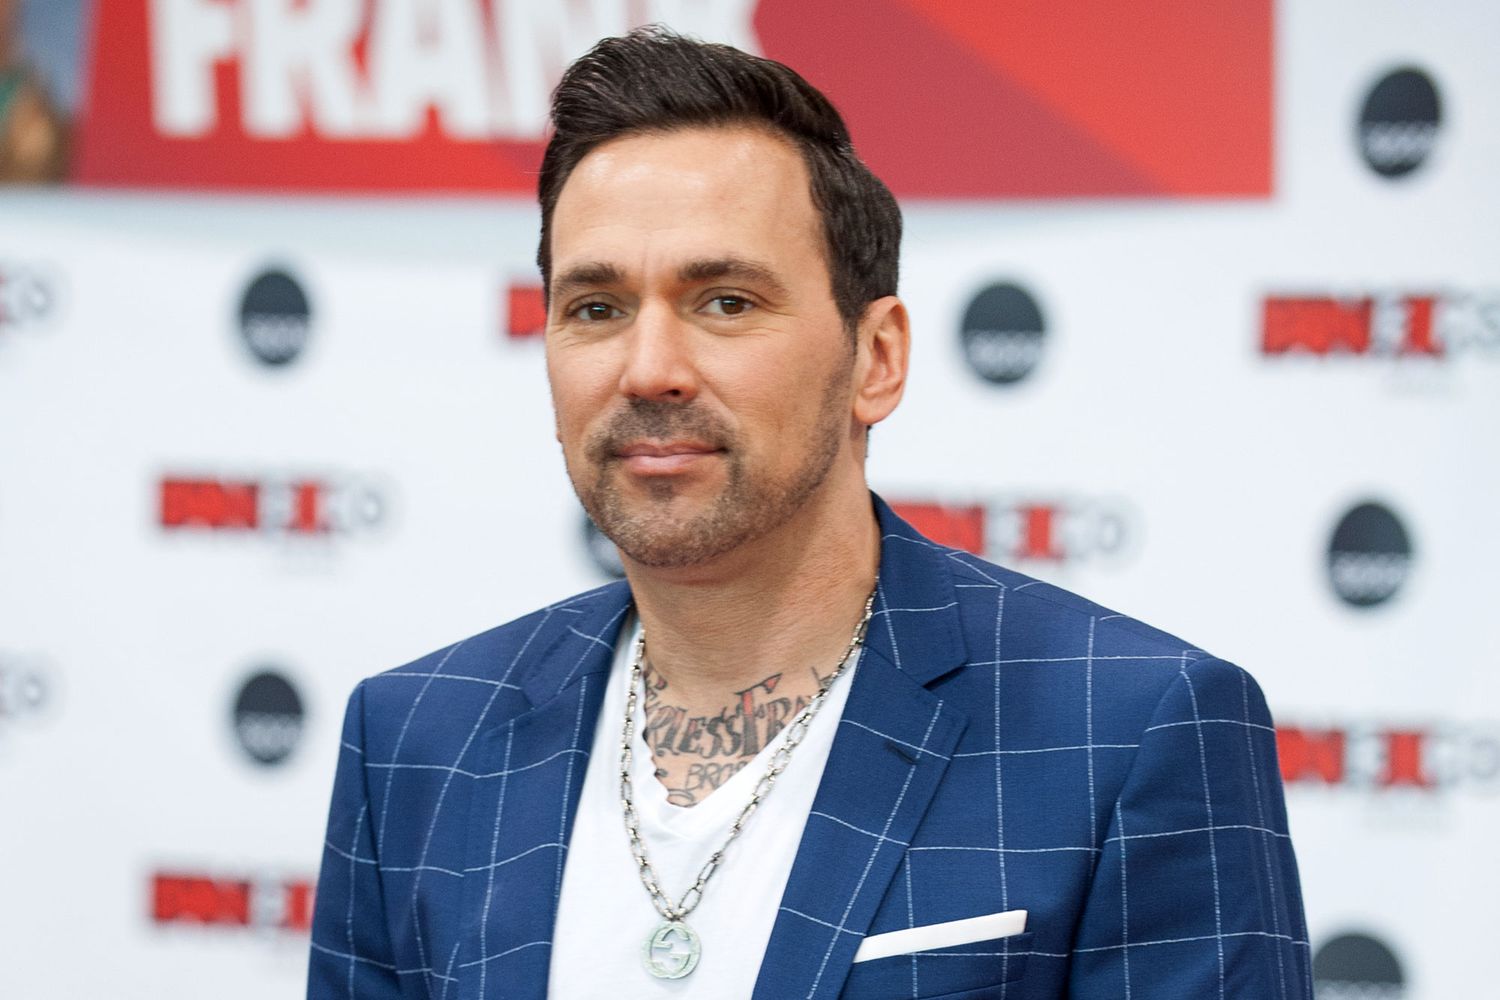 Actor Jason David Frank attends the 2018 Fan Expo Canada at Metro Toronto Convention Centre on August 31, 2018 in Toronto, Canada.